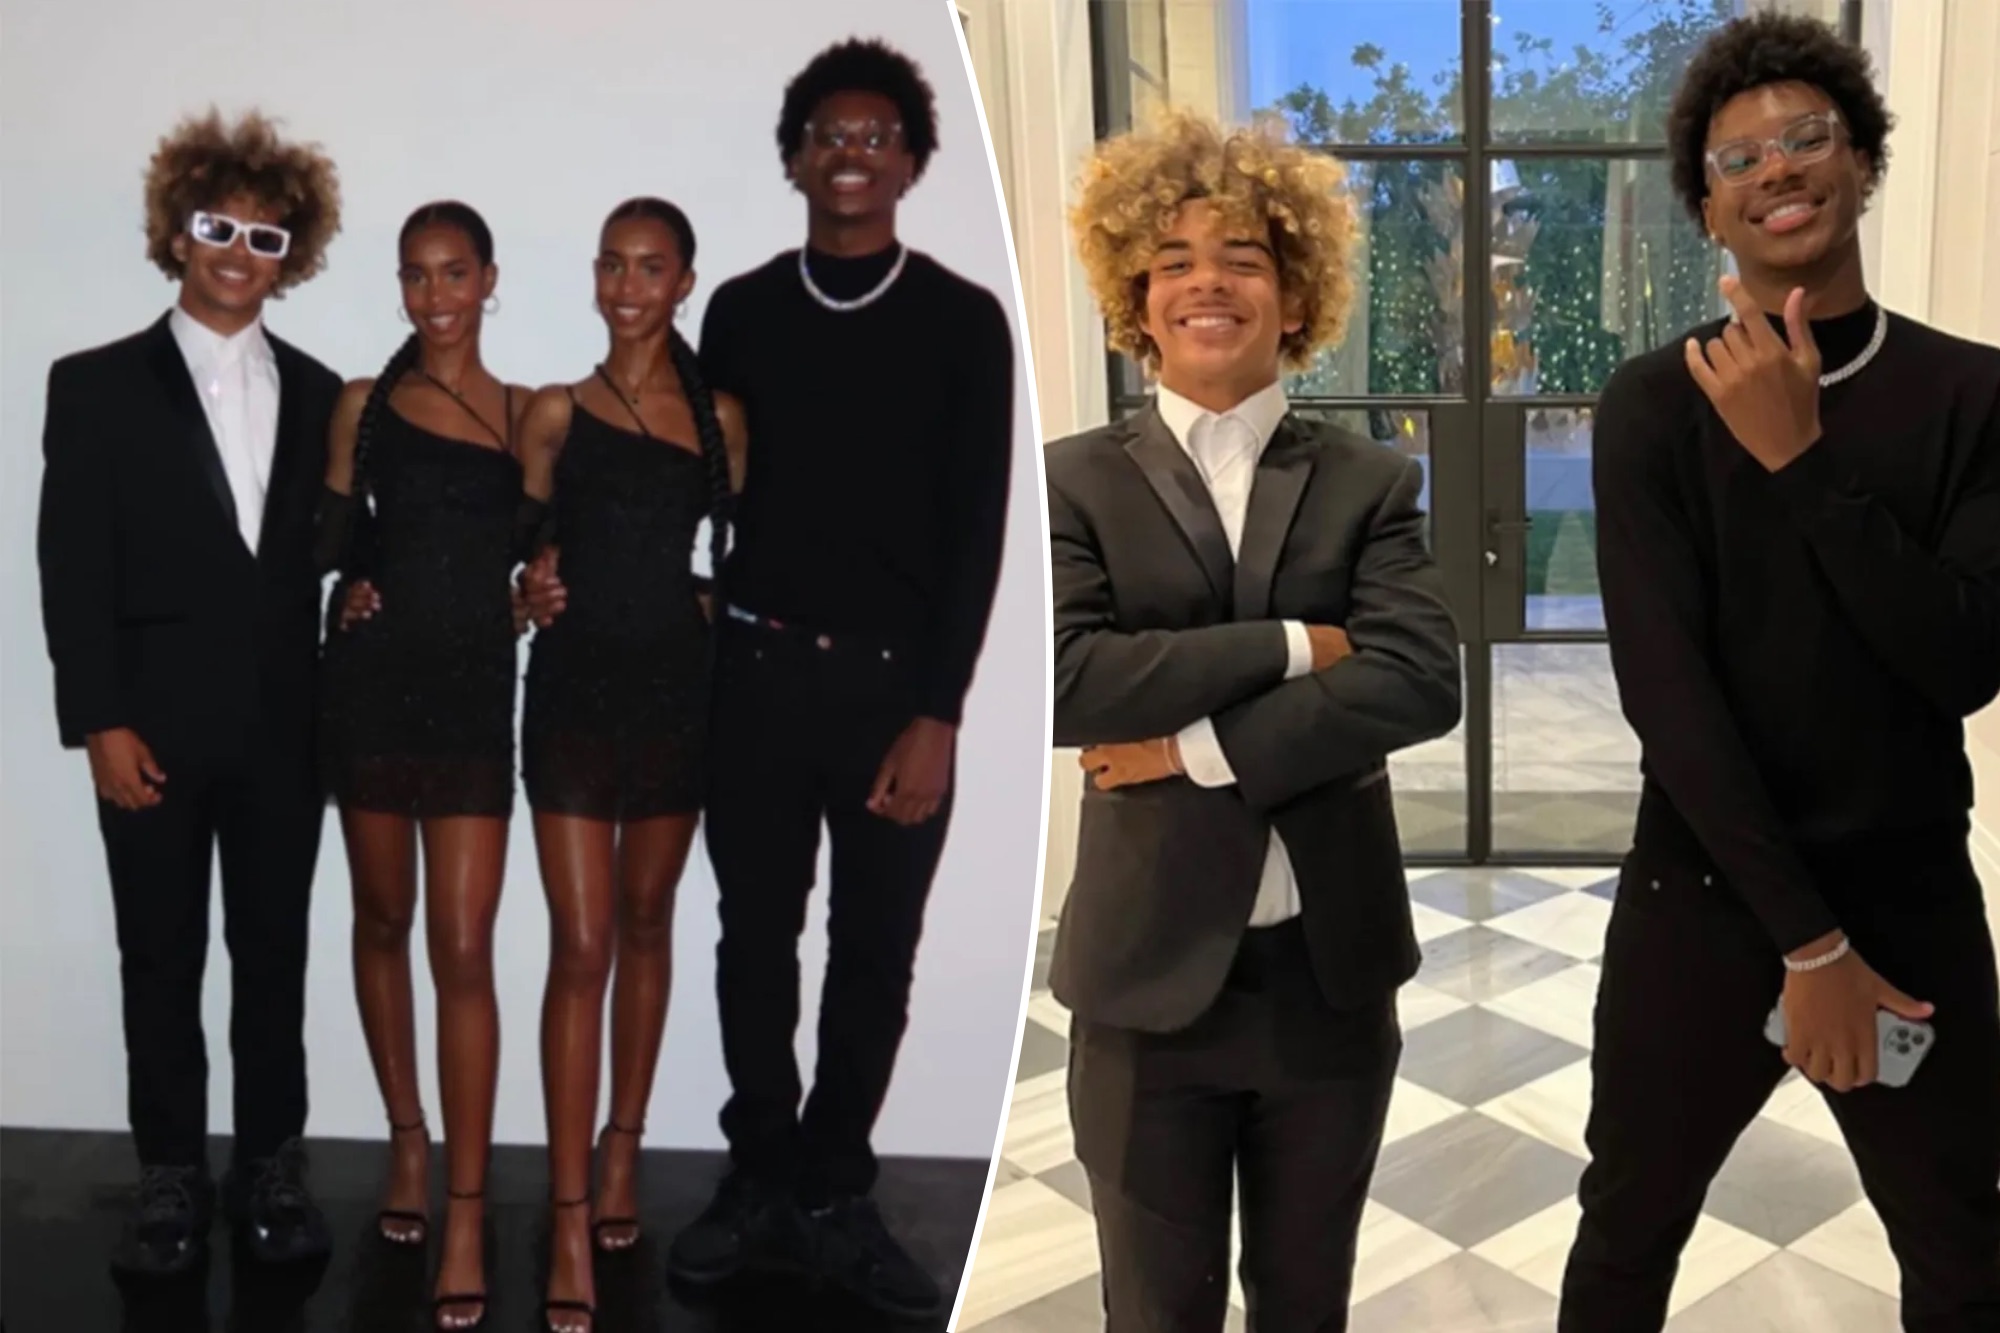 Bryce James takes Diddy's daughter to homecoming dance